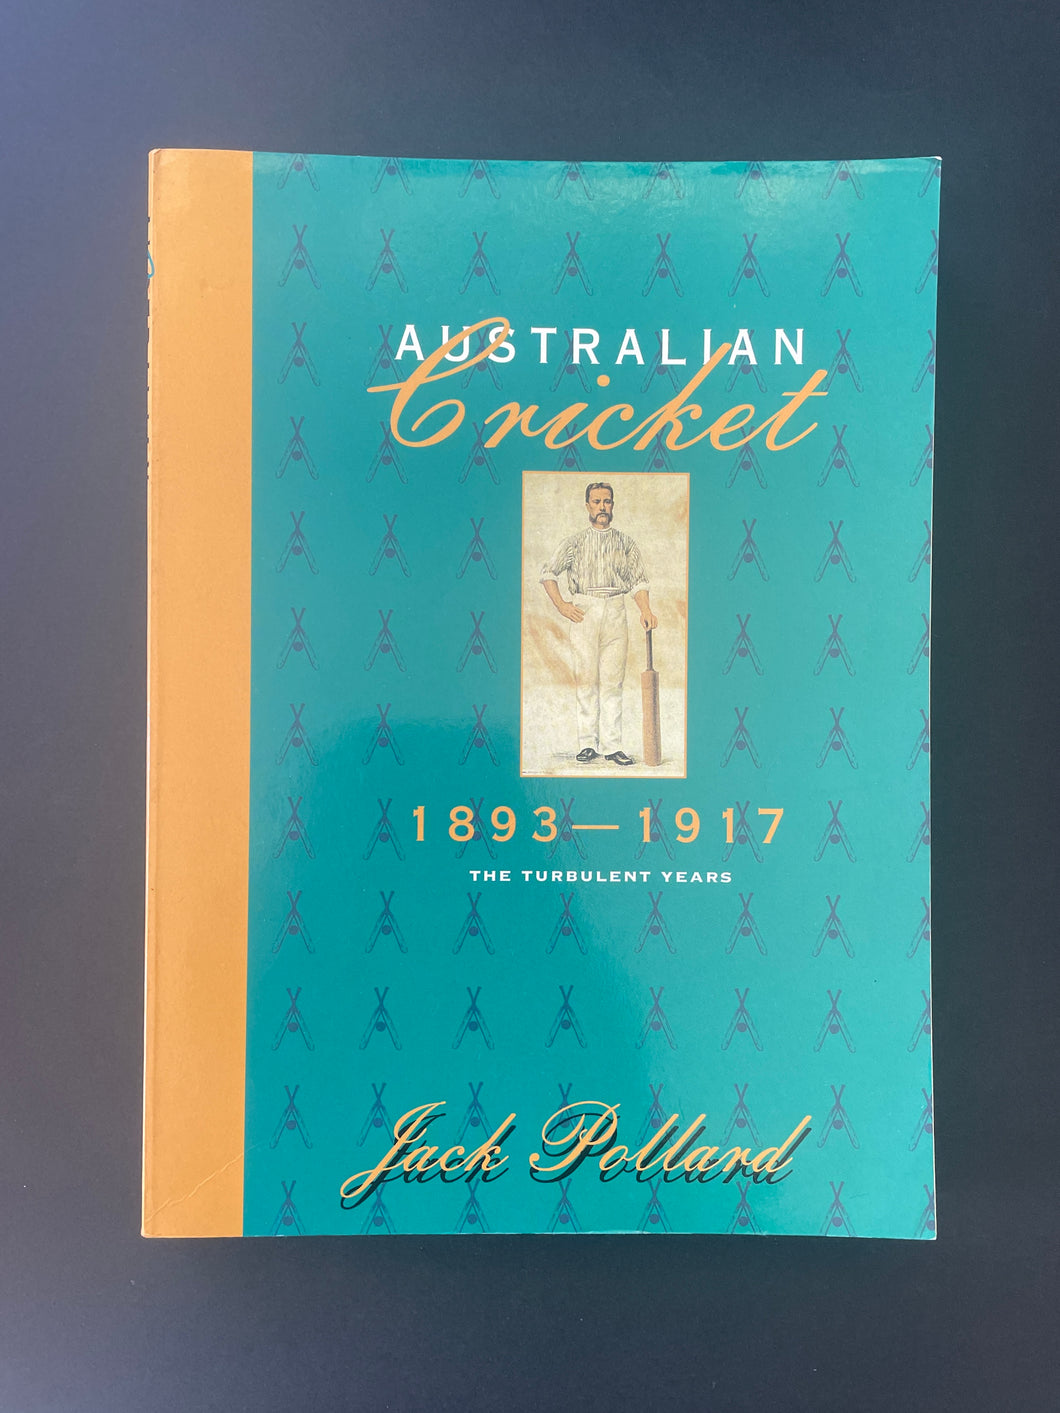 Australian Cricket-The Turbulent Years (1893-1917) by Jack Pollard: photo of the front cover which shows very minor scuff marks, creasing, and scratches.